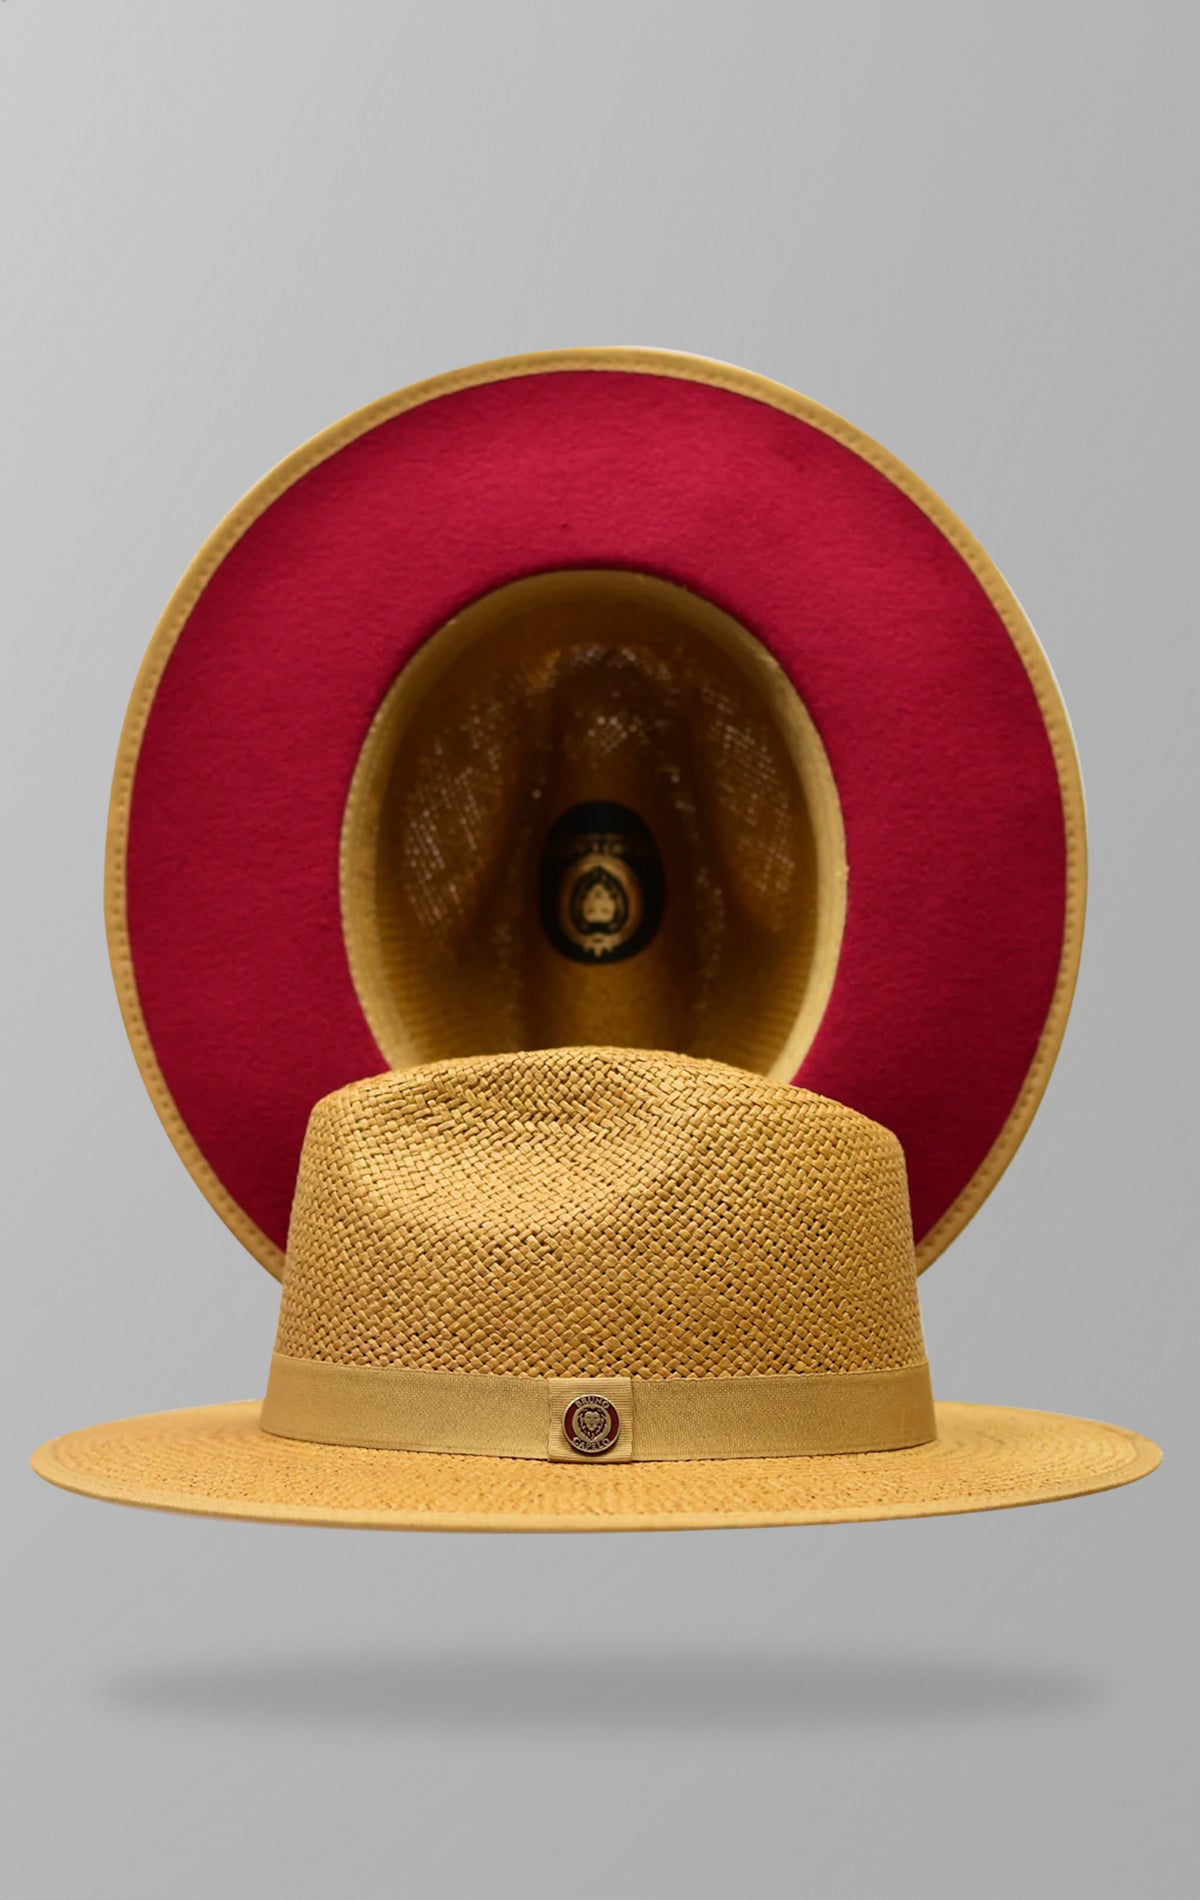 Kingdom limited edition natural straw hat with contrast under brim and 3-inch wide flat brim.